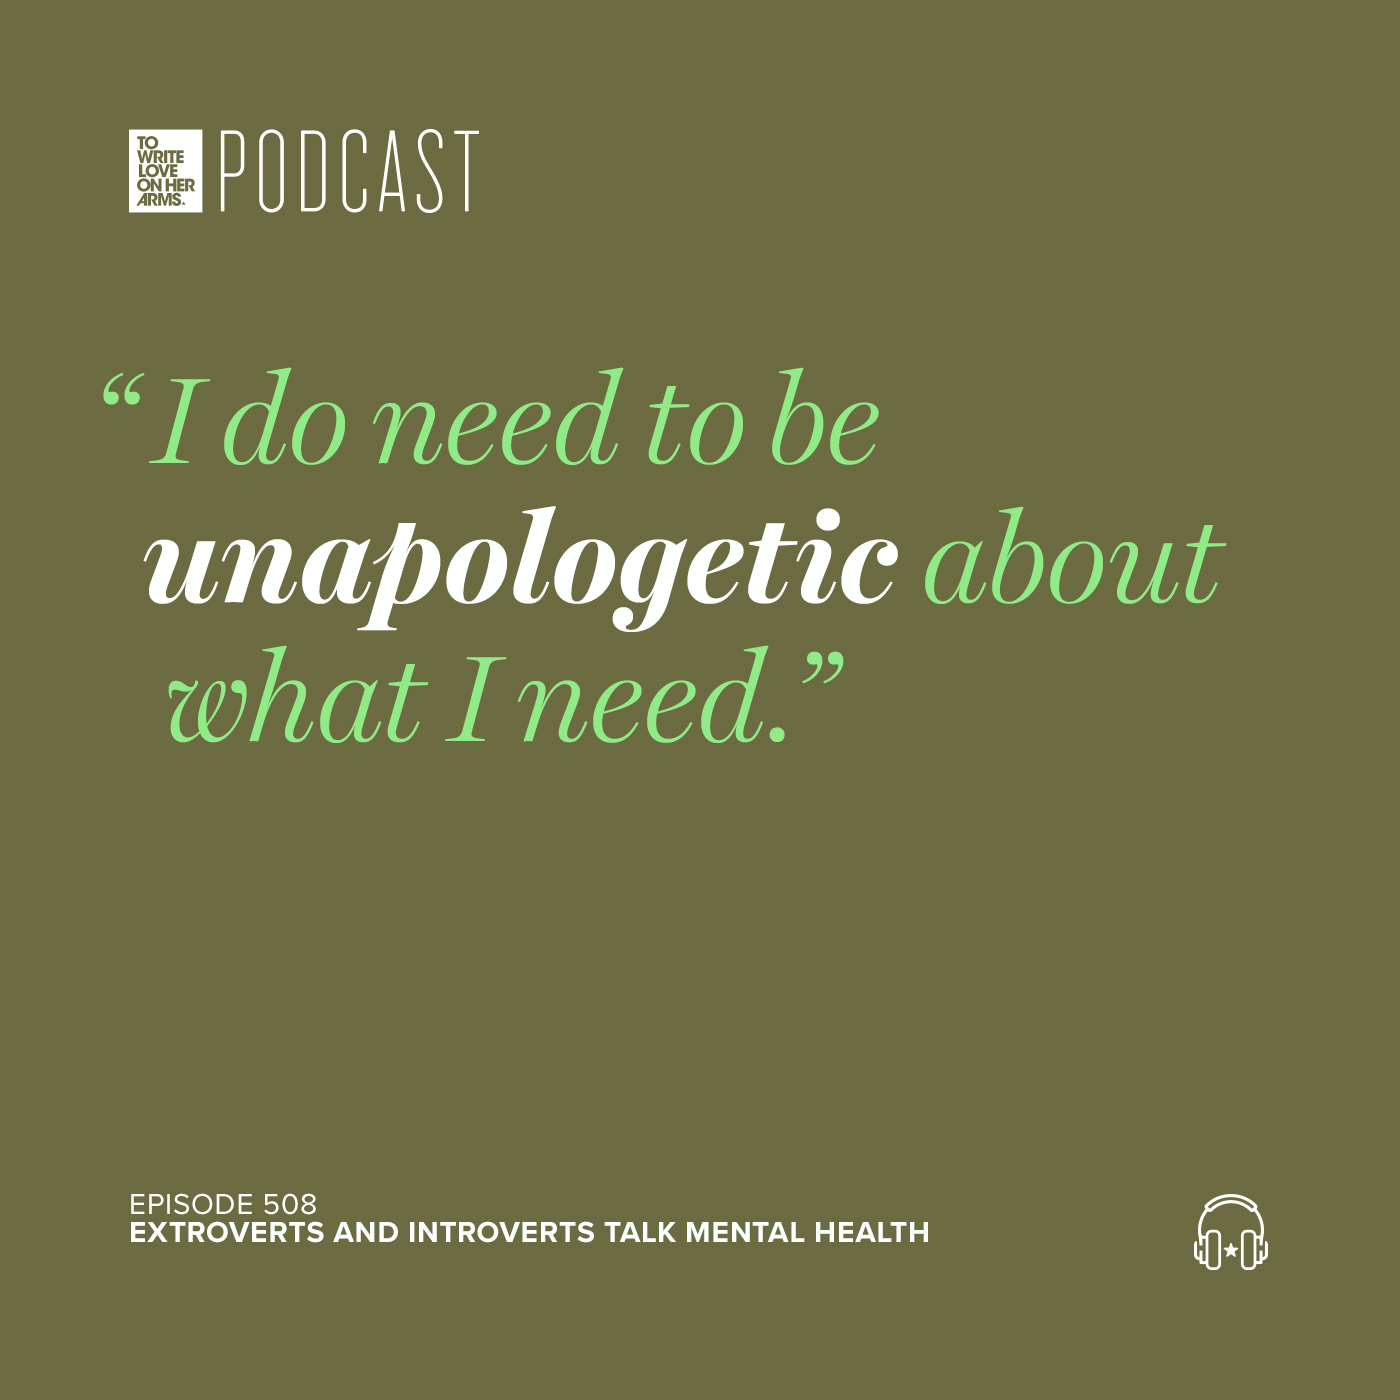 Jessica McAuley, Host of Introvert's Guide To... Podcast